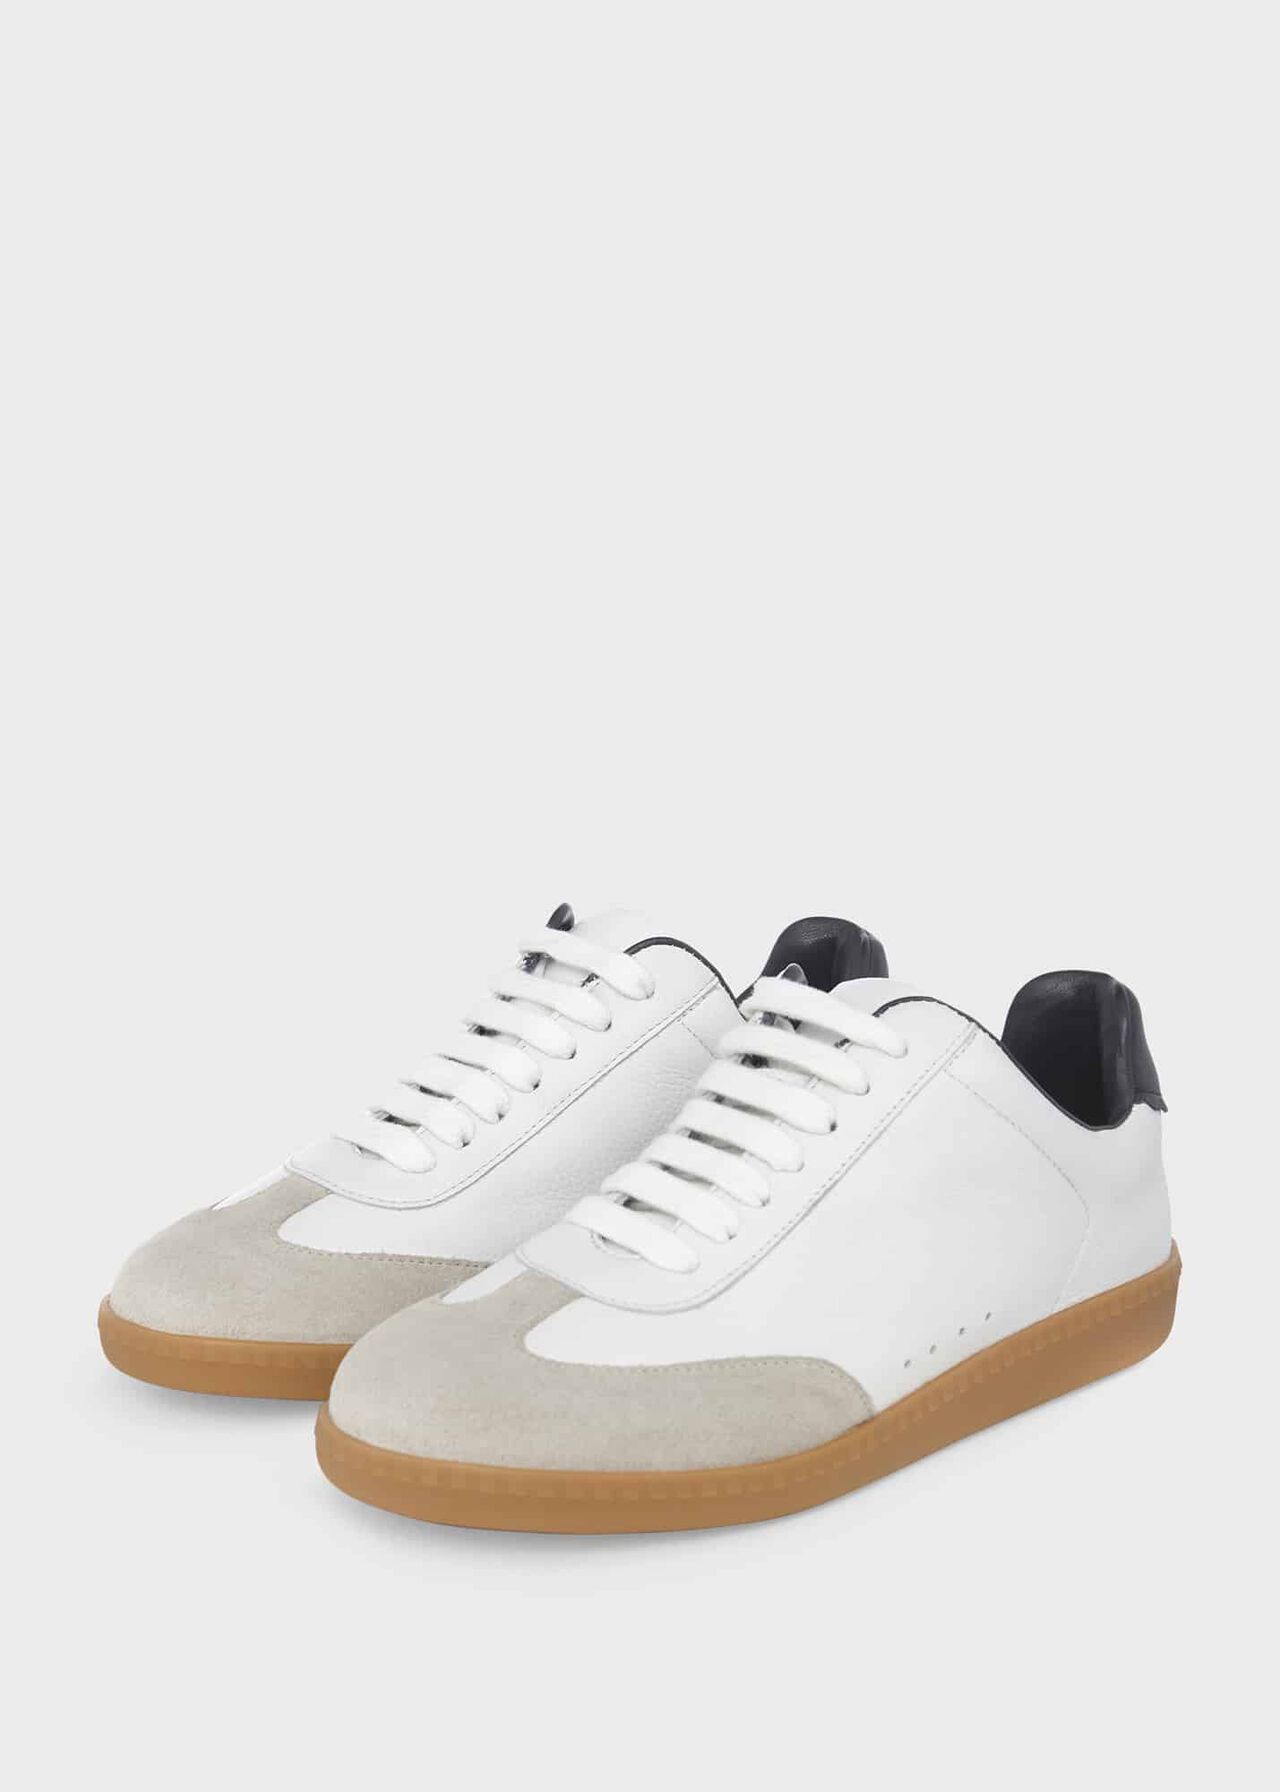 Madden Sneakers, White Navy, hi-res